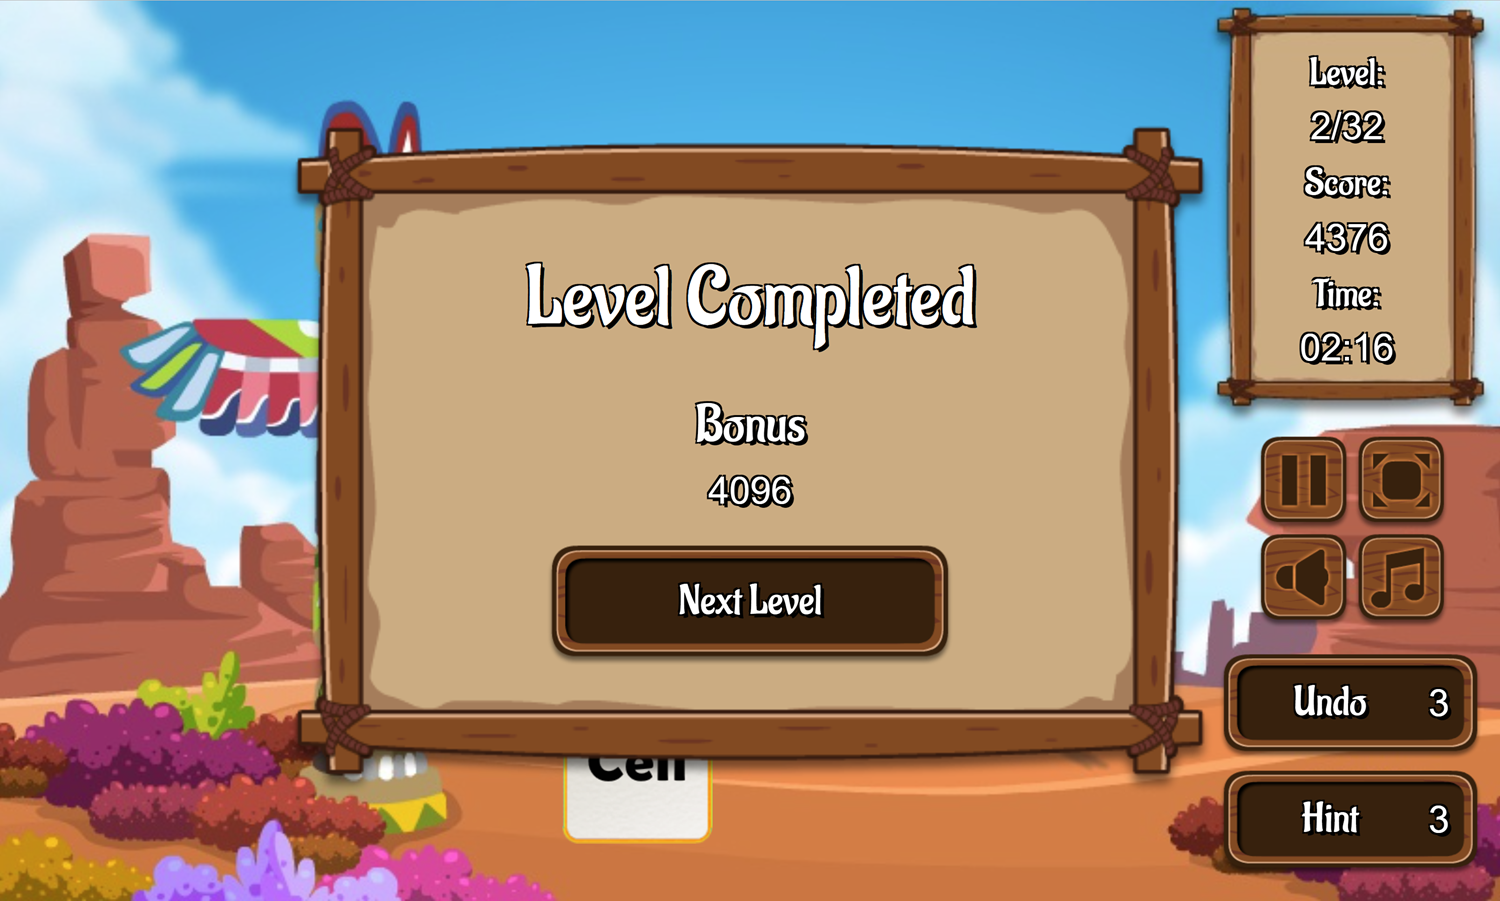 Totem Solitaire Game Level Completed Screen Screenshot.